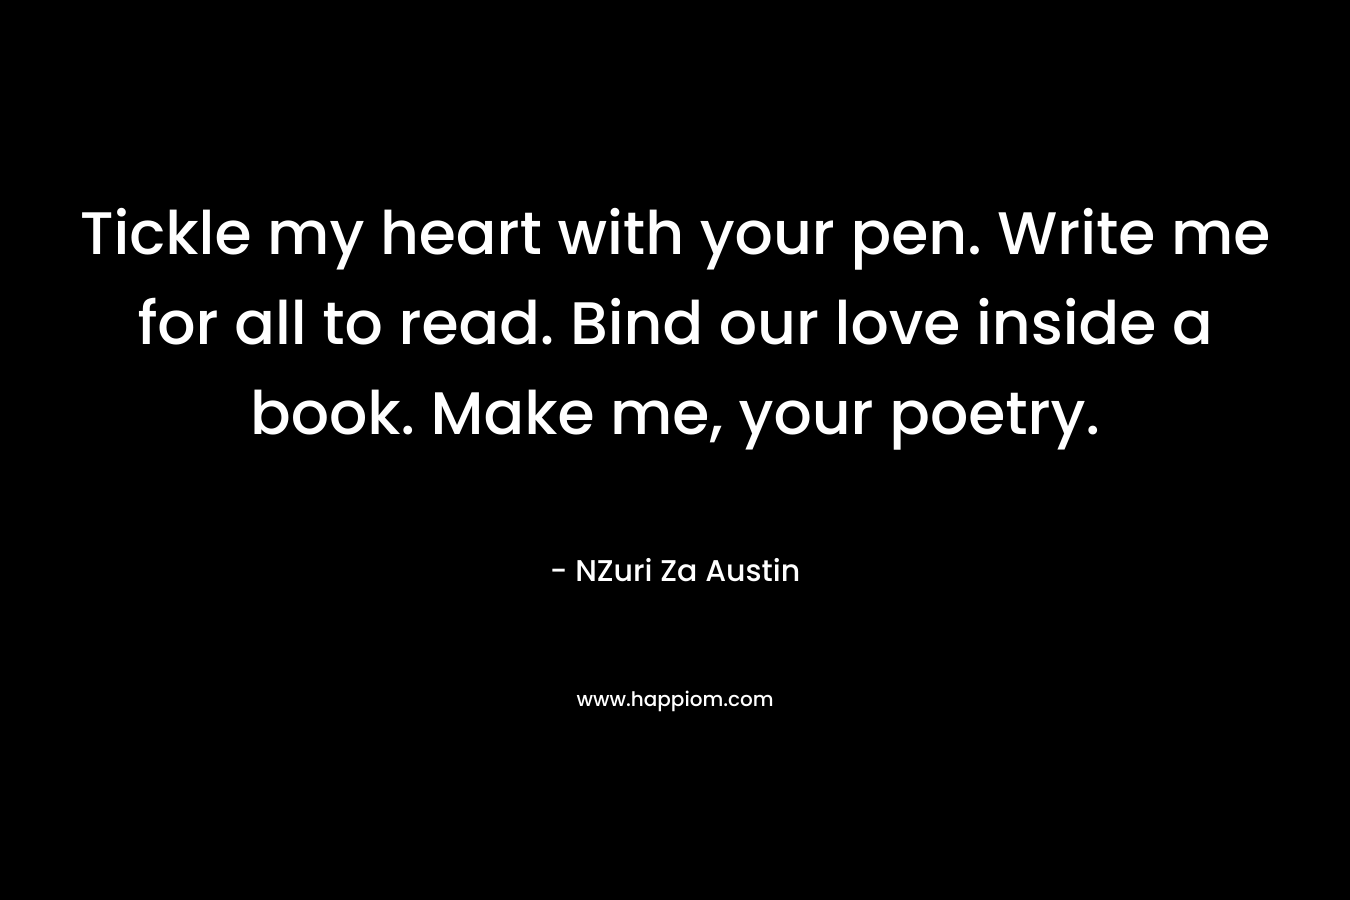 Tickle my heart with your pen. Write me for all to read. Bind our love inside a book. Make me, your poetry.